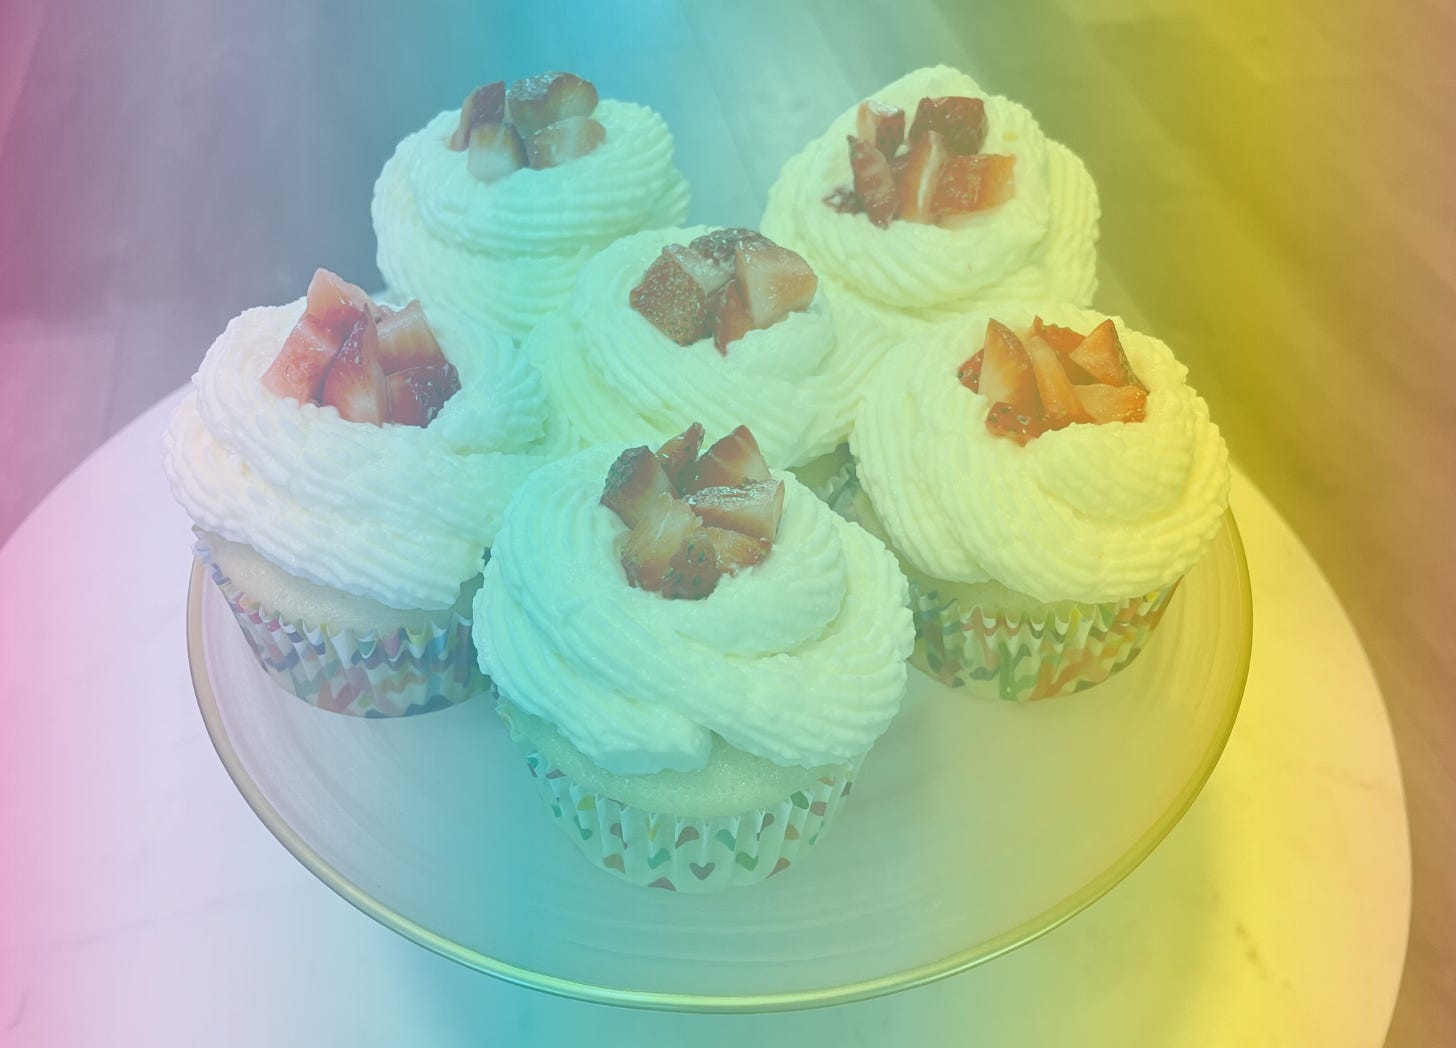 A rainbow-filtered photograph of 5 cupcakes on a plate, piled high with white whipped cream frosting and diced strawberries